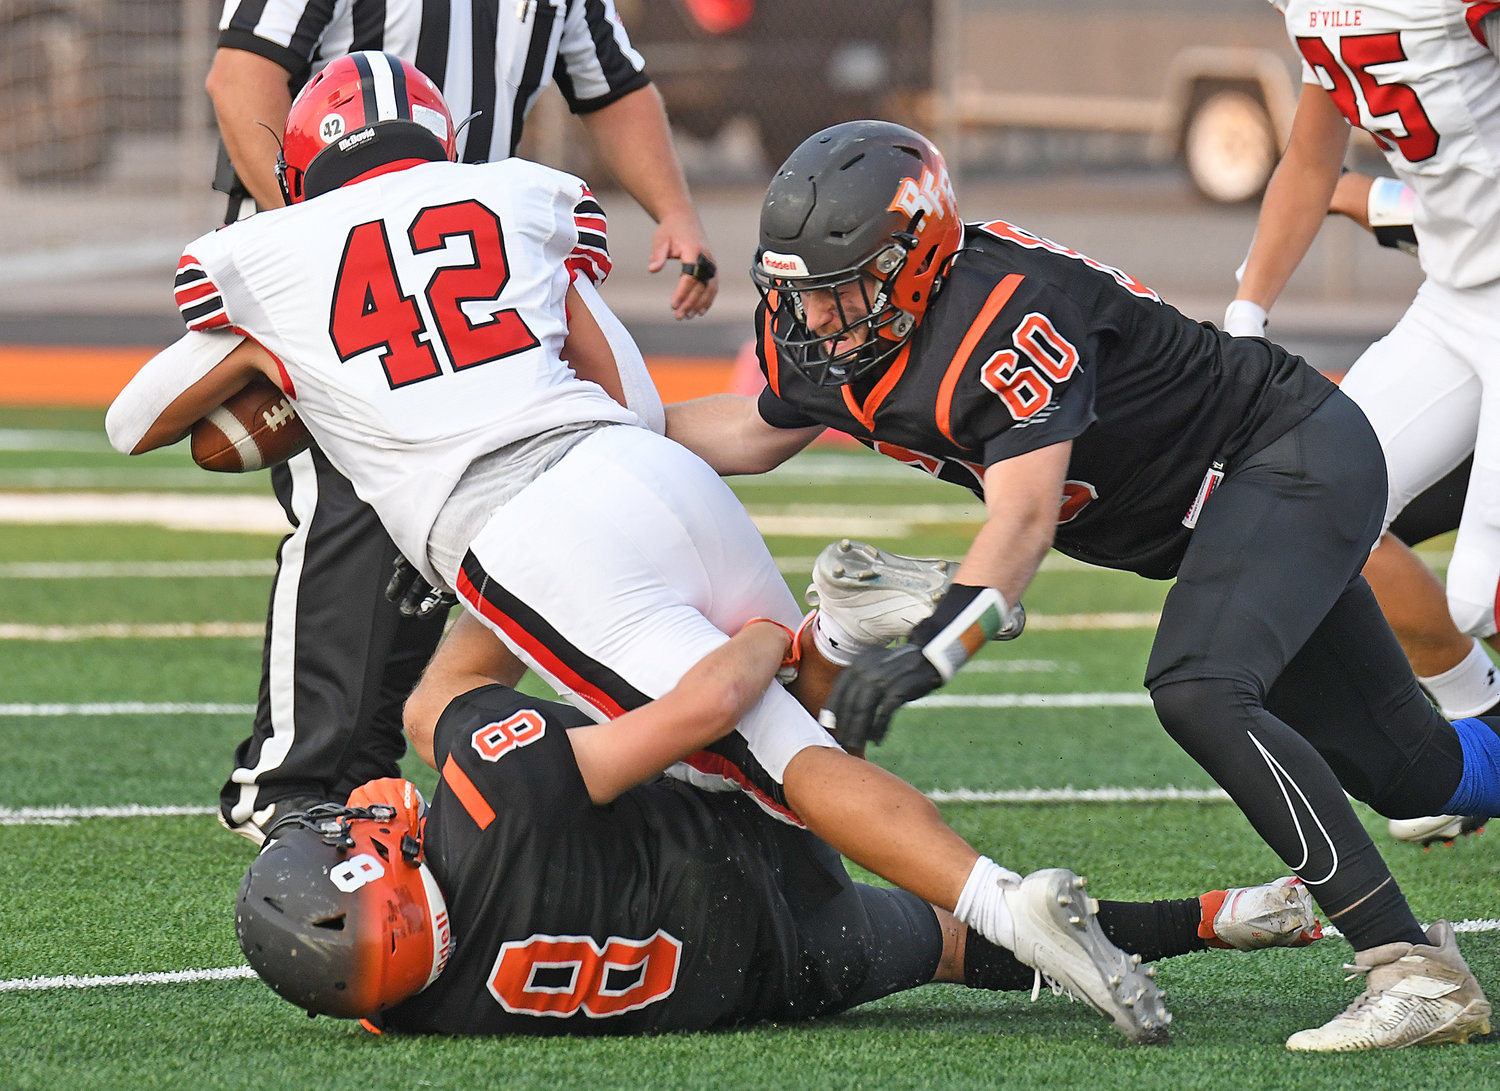 Rinaldo DiCastro (8) and Brian East tackle Baldwinsville's Nicholas Foster in the first quarter Friday night at RFA Stadium. The Bees won 55-13.